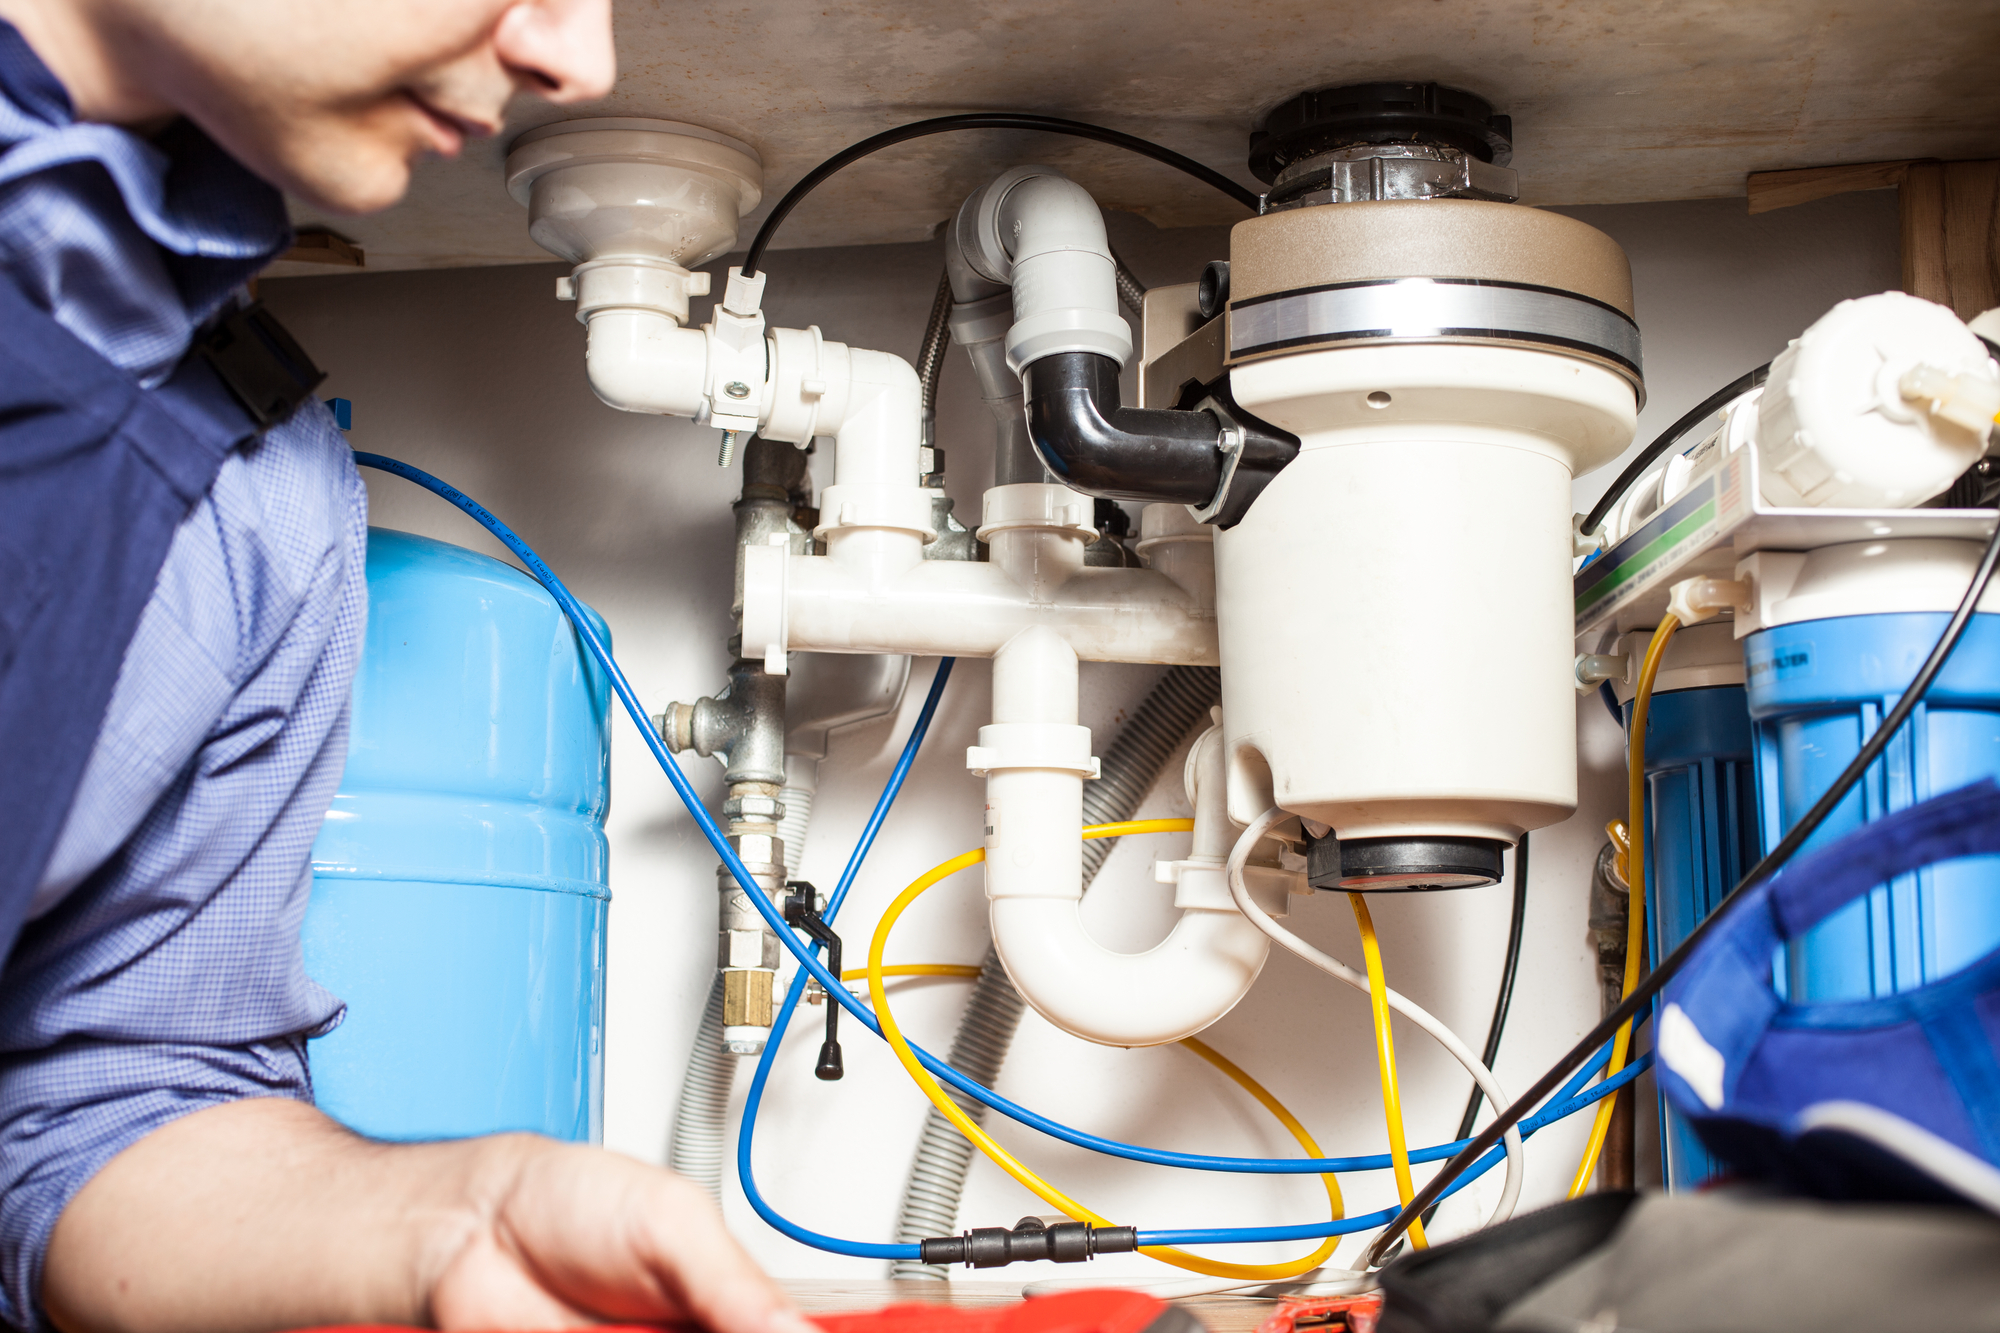 Is Garbage Disposal Plumbing Or Appliance? Decide Now